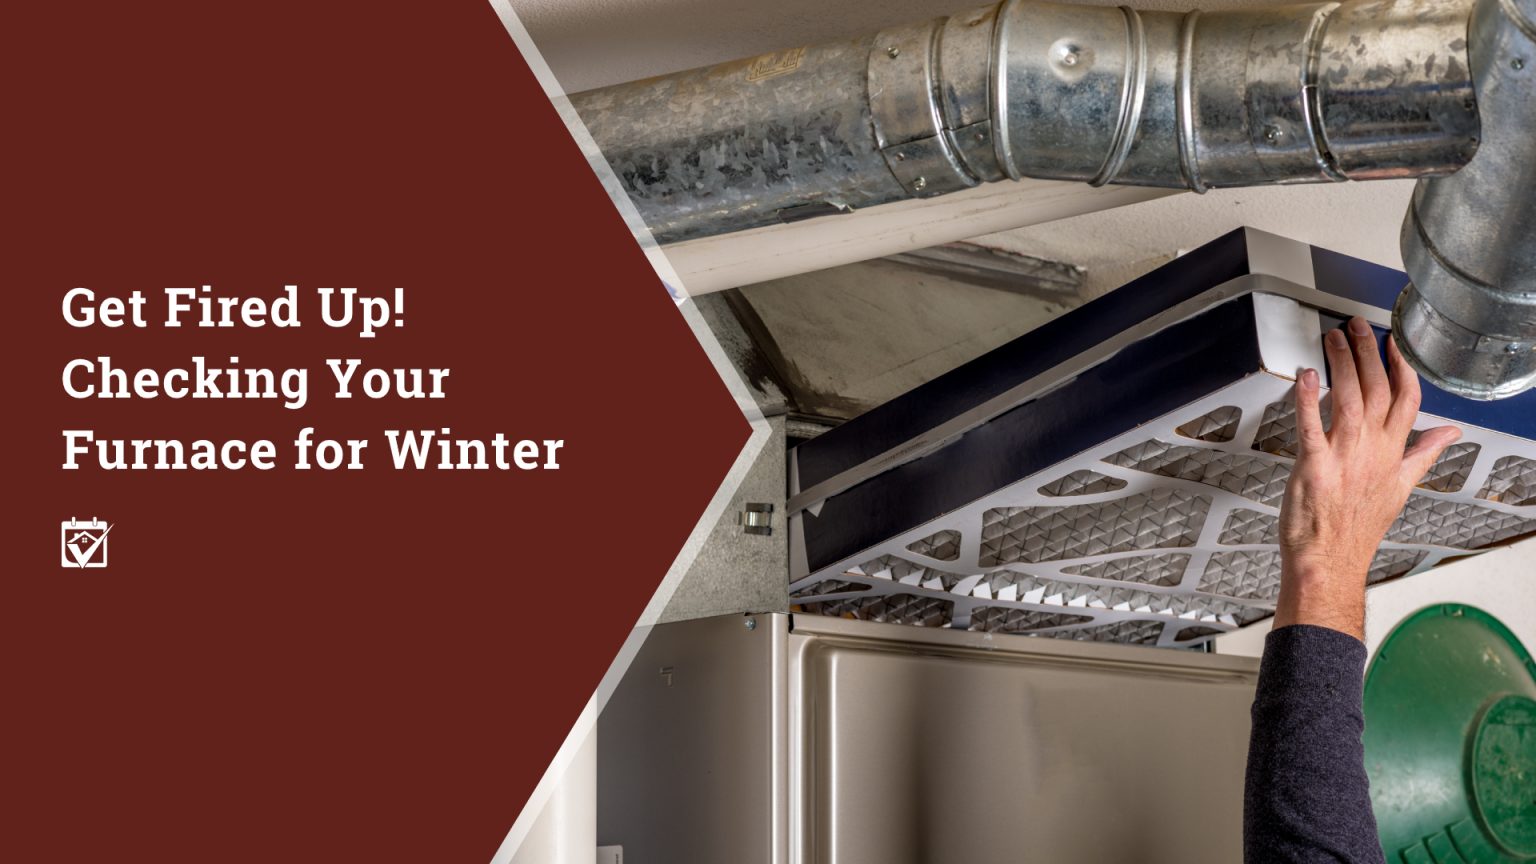 Checking Your Furnace for Winter